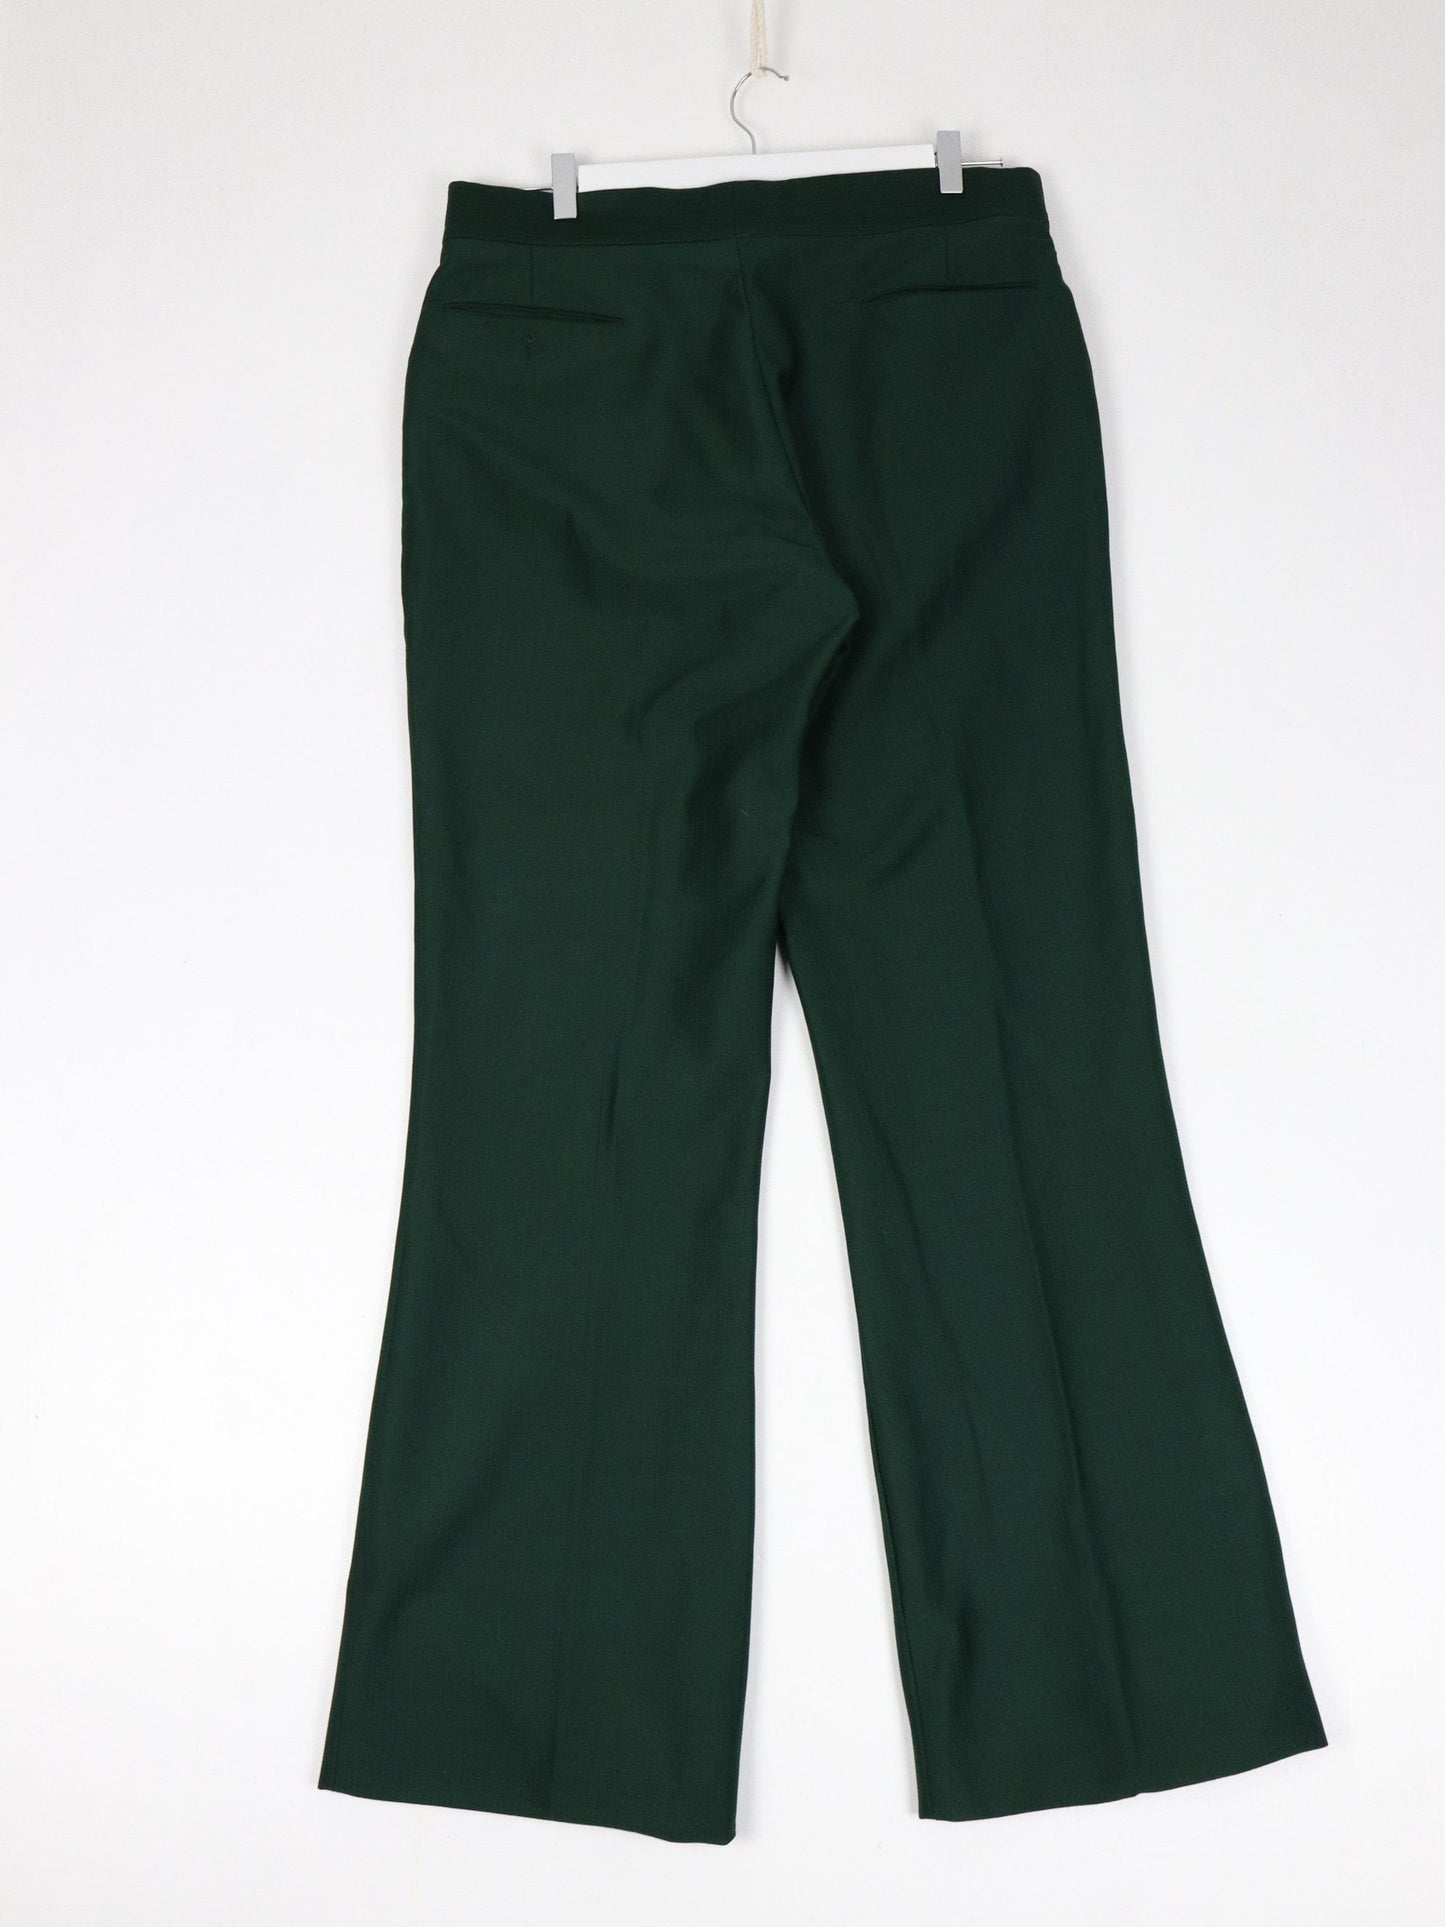 Other Pants Vintage Dress Pants Mens 36 x 33 Green Pleated Trousers 70s 80s Flare